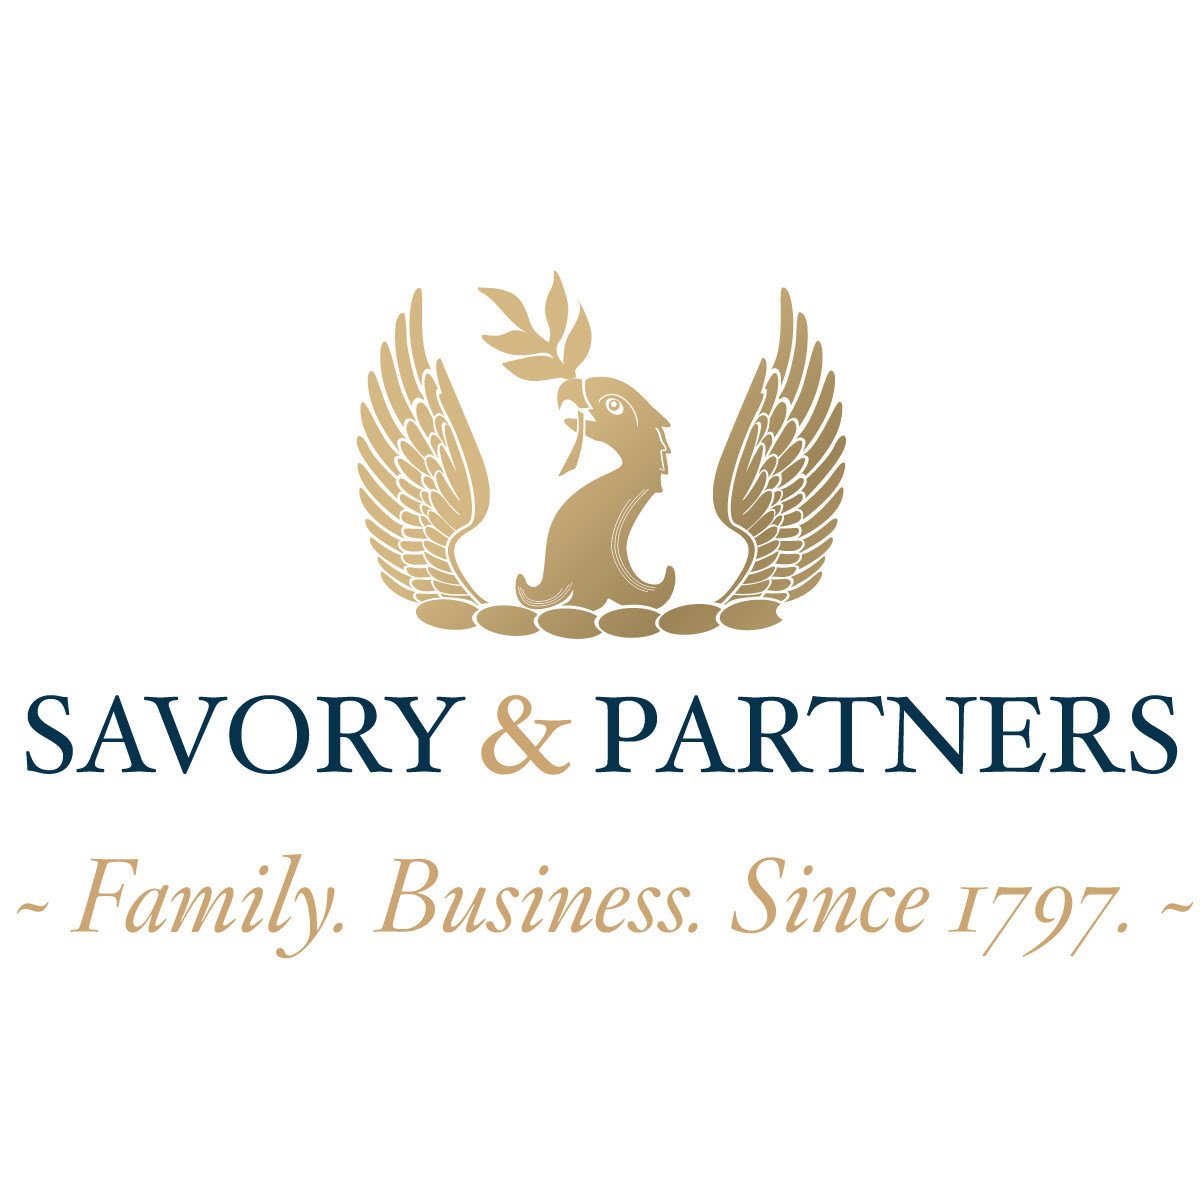 Savory & Partners: The Education Benefits Of Having A Second Citizenship